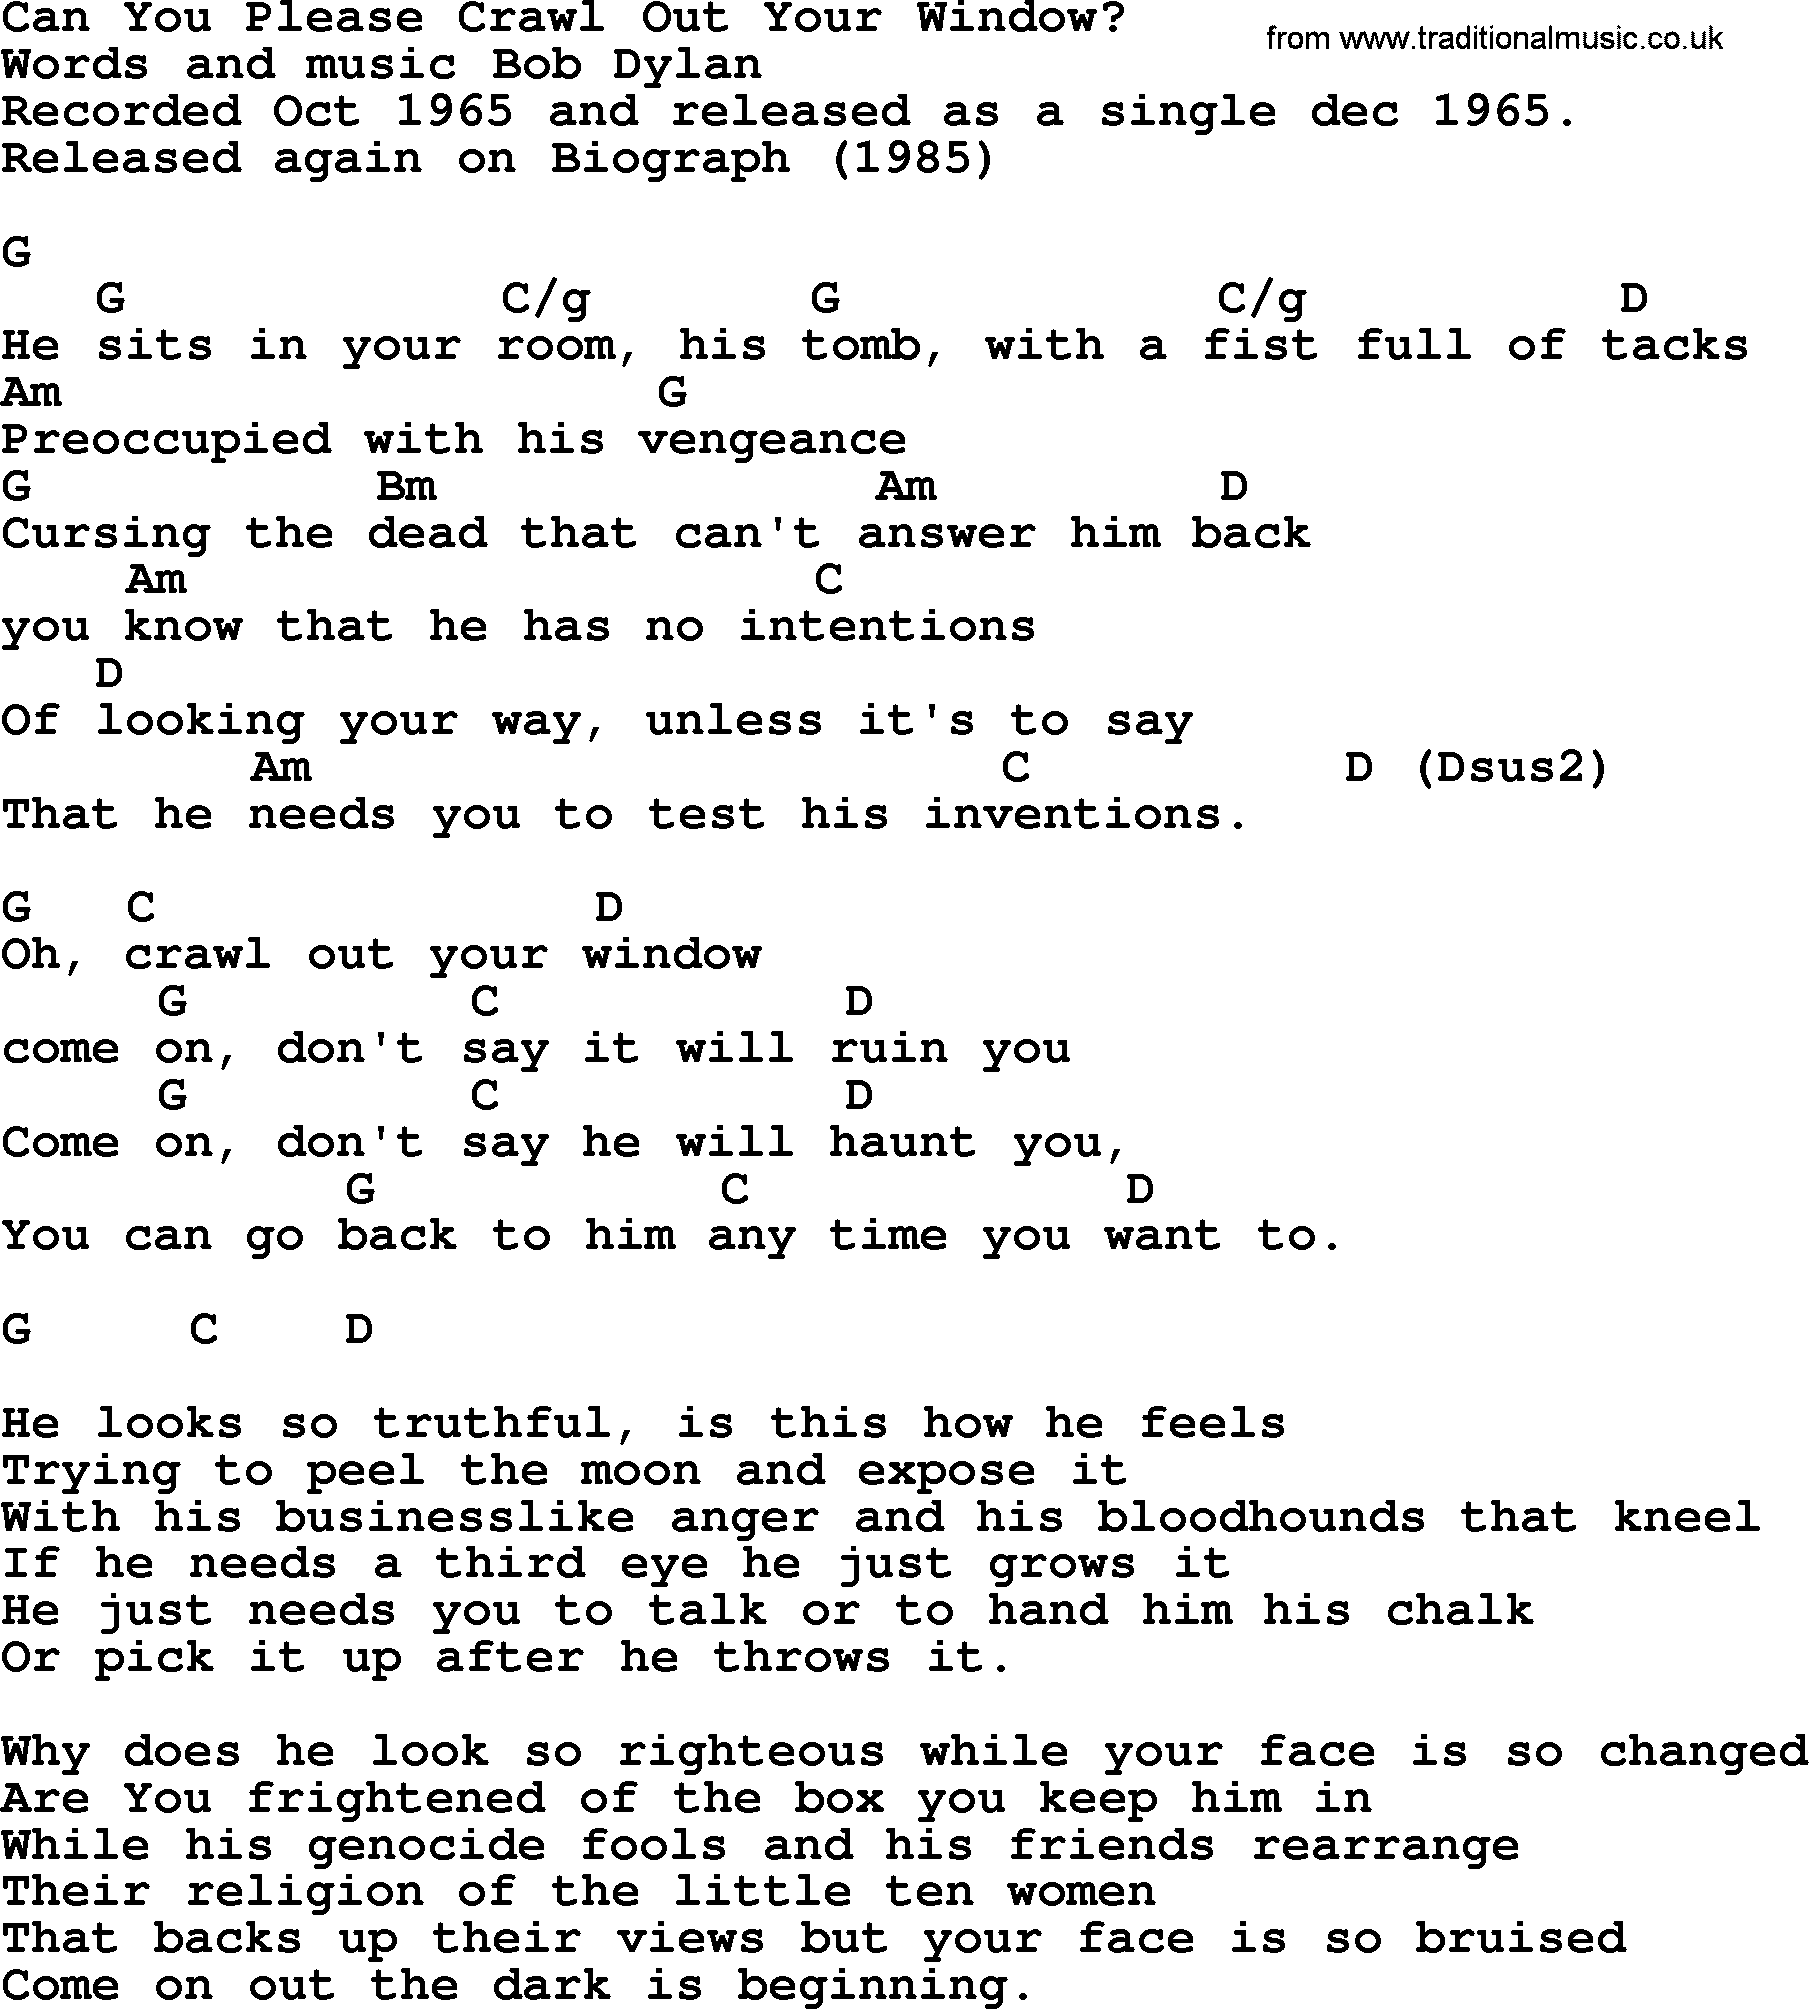 Bob Dylan song - Can You Please Crawl Out Your Window, lyrics and chords